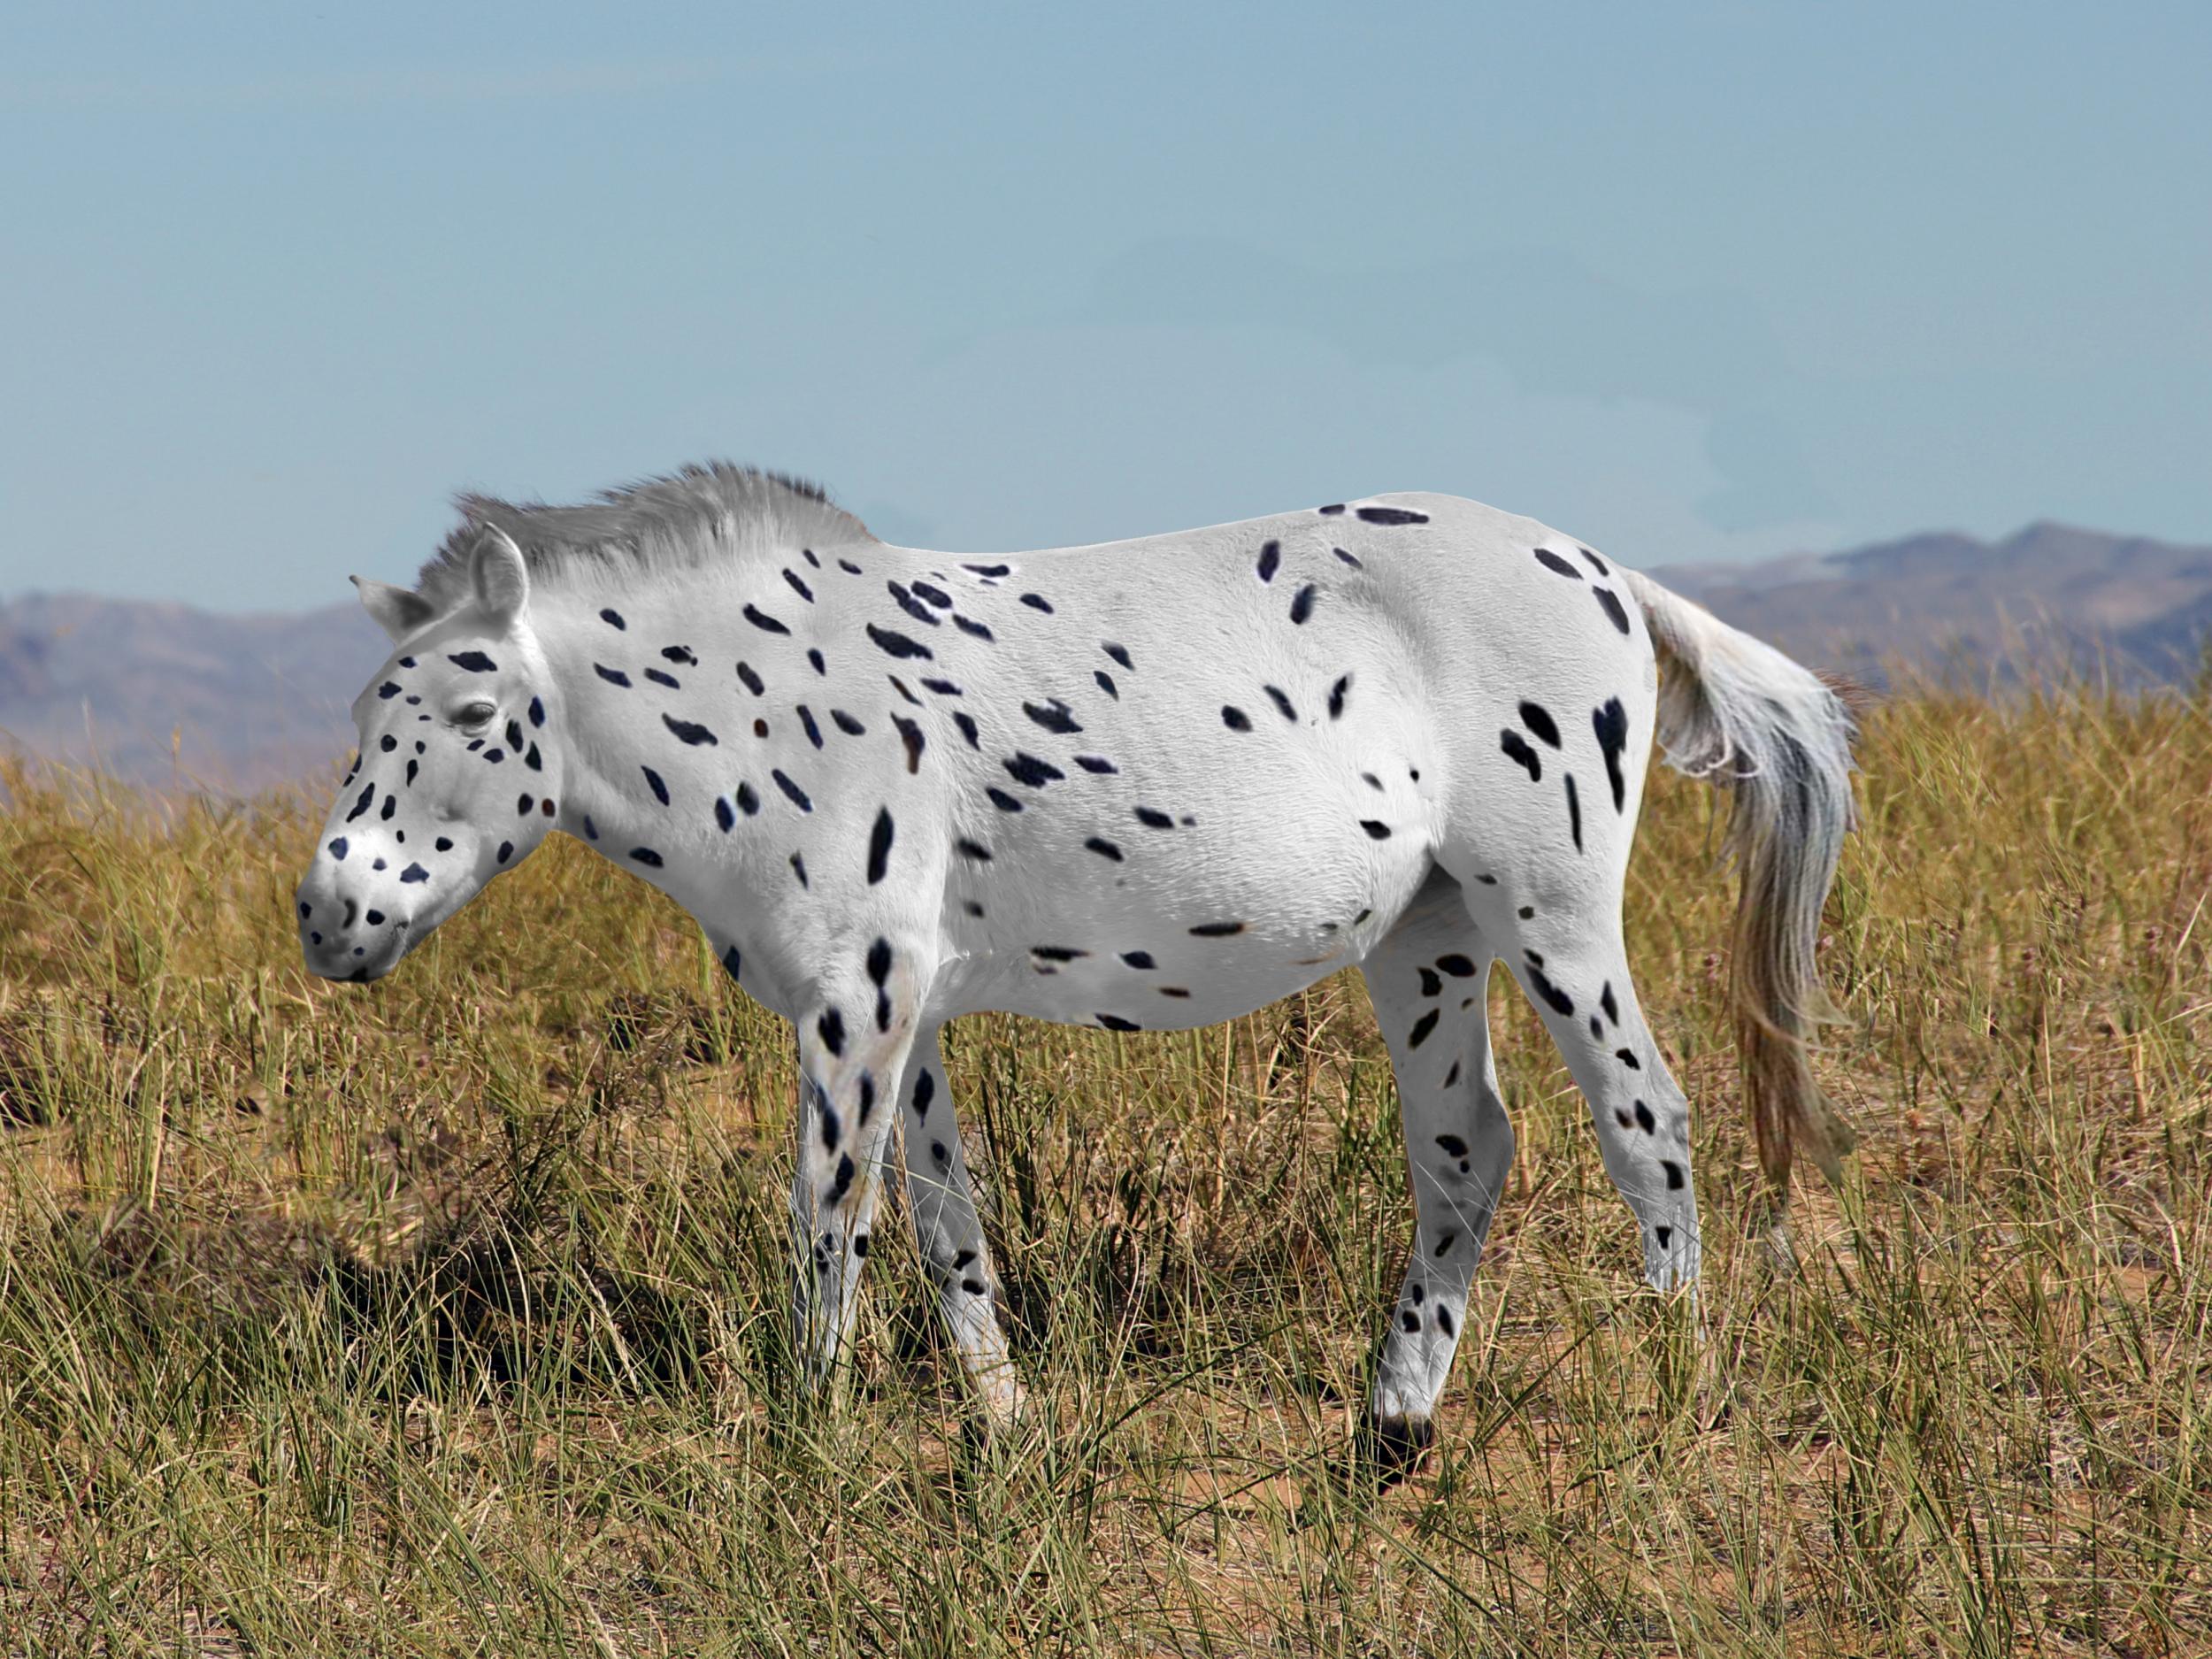 The ancestors of the Przewalski's horses that inhabit Mongolia today were bred to have "leopard spot" marks on their skin